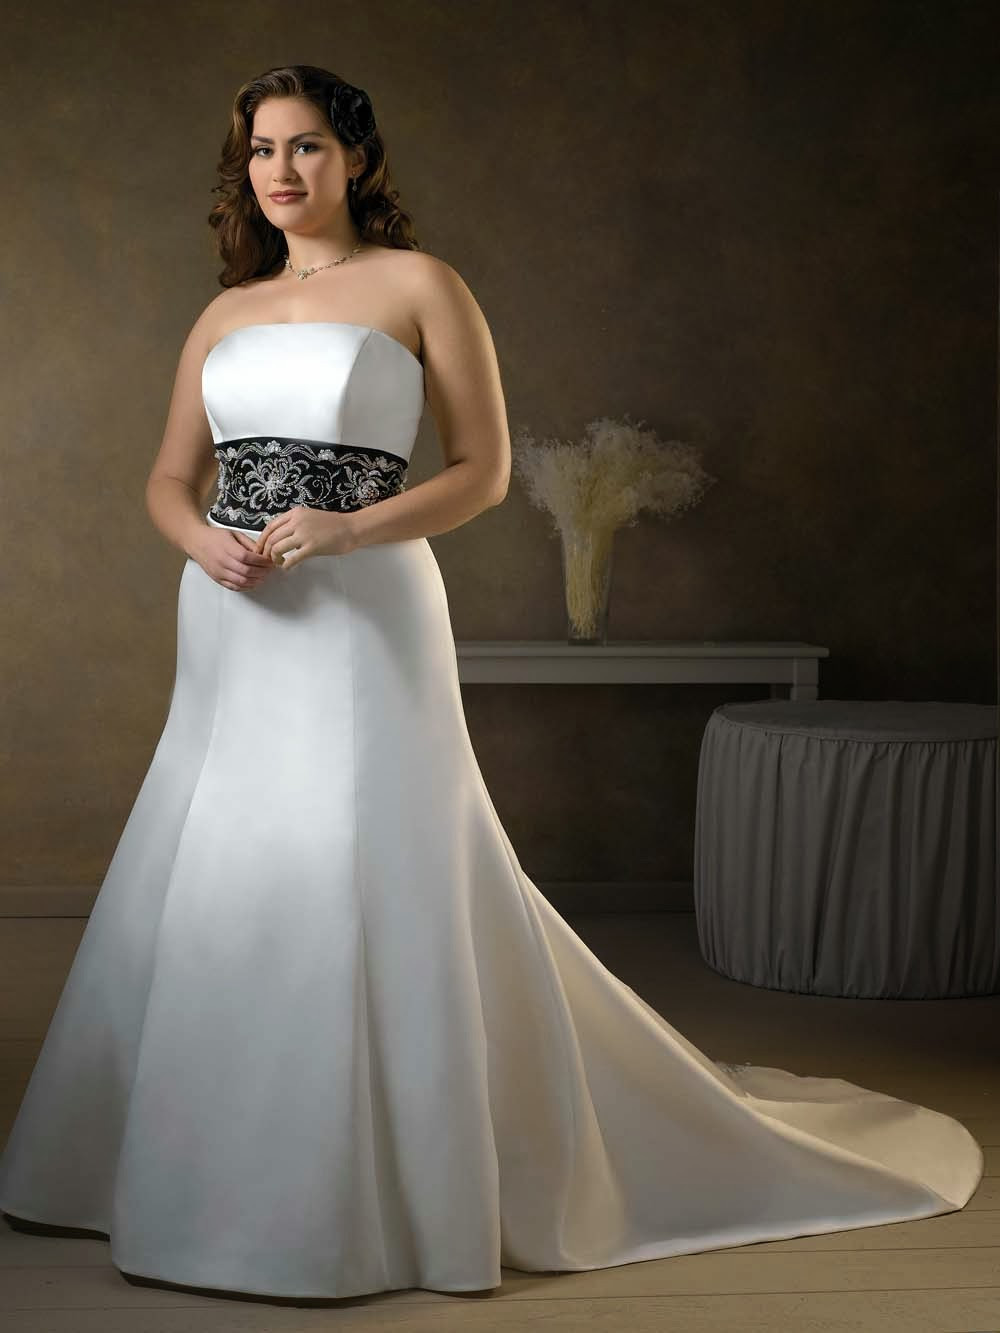 Preowned Wedding Dresses
 USED WEDDING GOWN GET HIGH QUALITY PLUS SIZE DRESS WITH